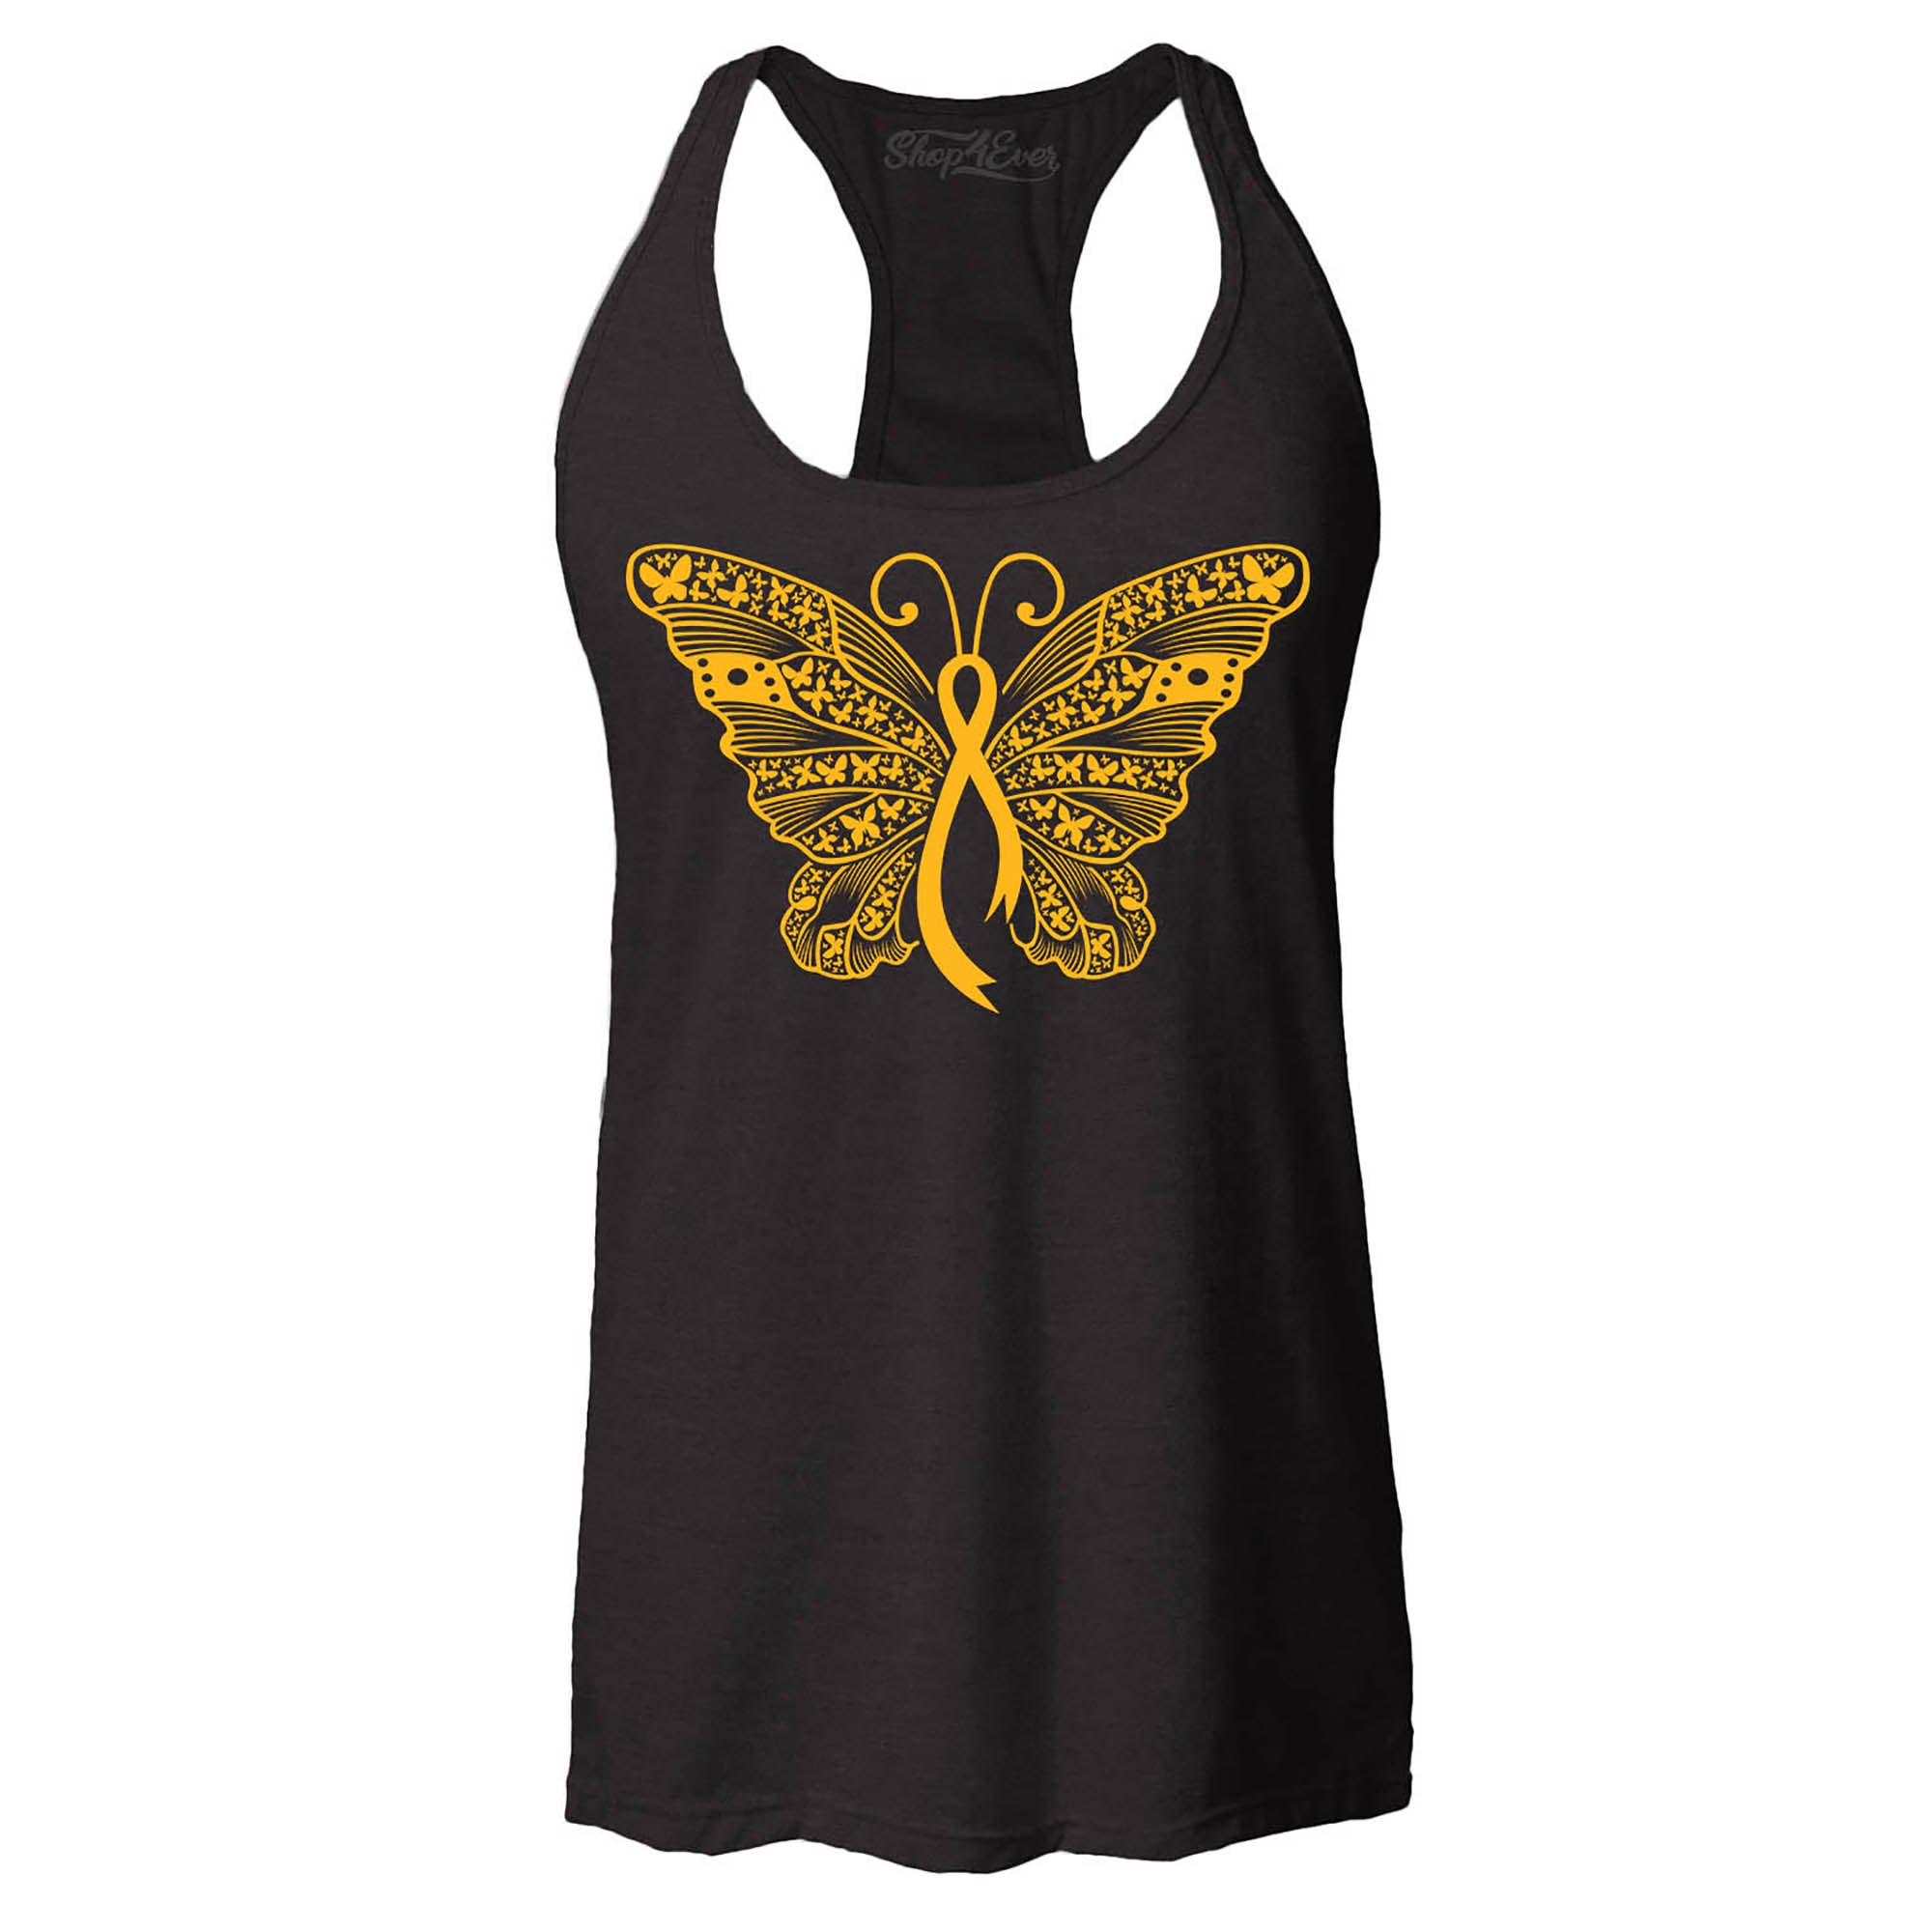 Gold Ribbon Butterfly Childhood Cancer Awareness Women's Racerback Tank Top Slim Fit